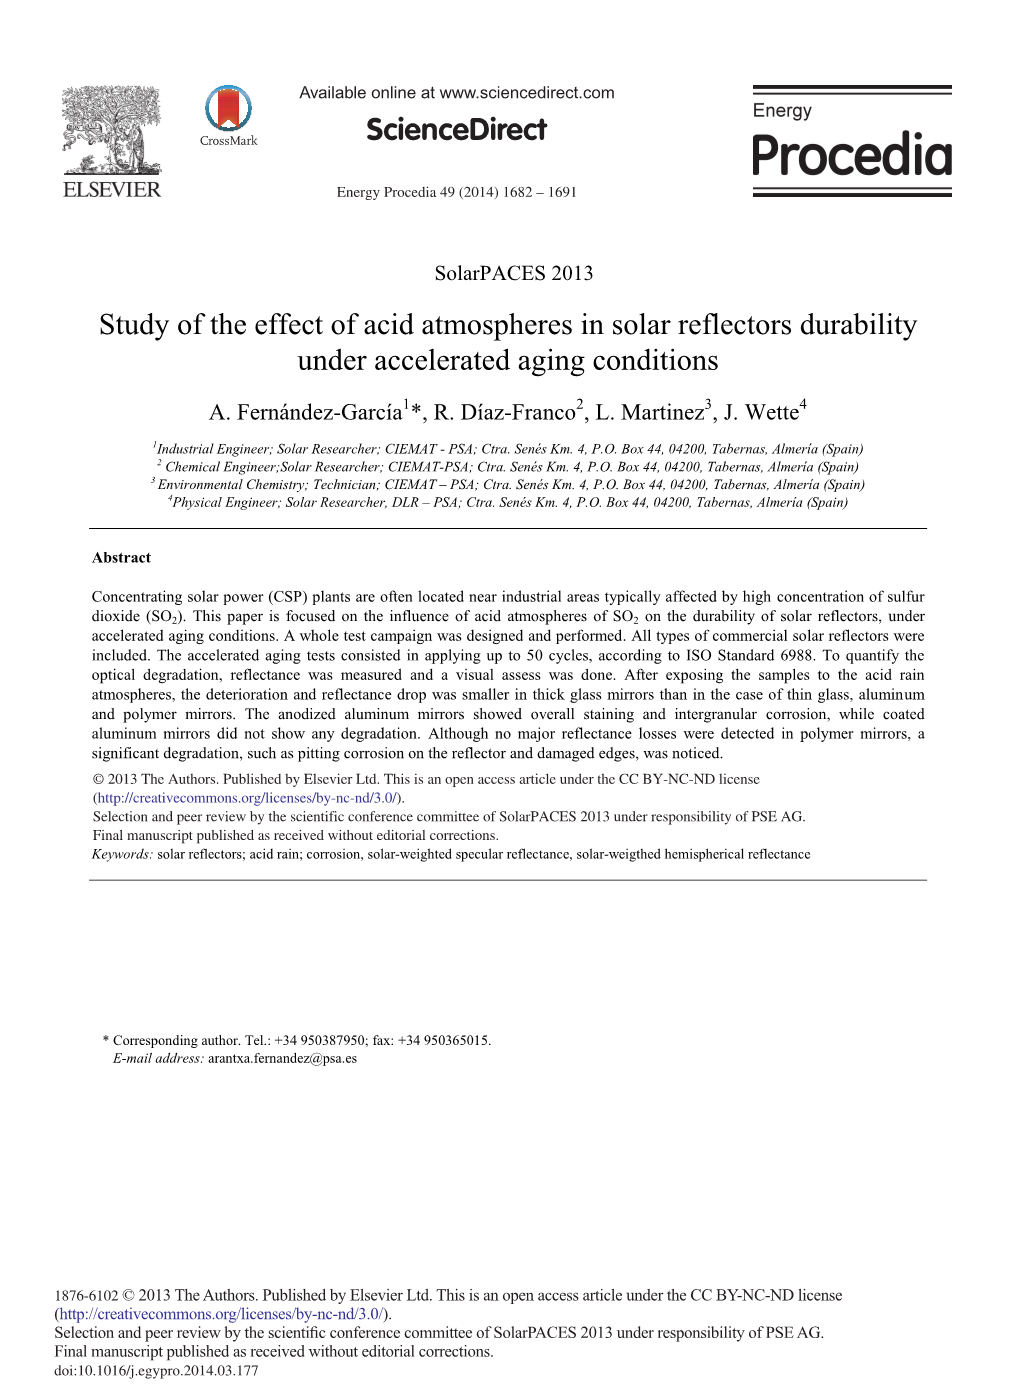 Study of the Effect of Acid Atmospheres in Solar Reflectors Durability Under Accelerated Aging Conditions